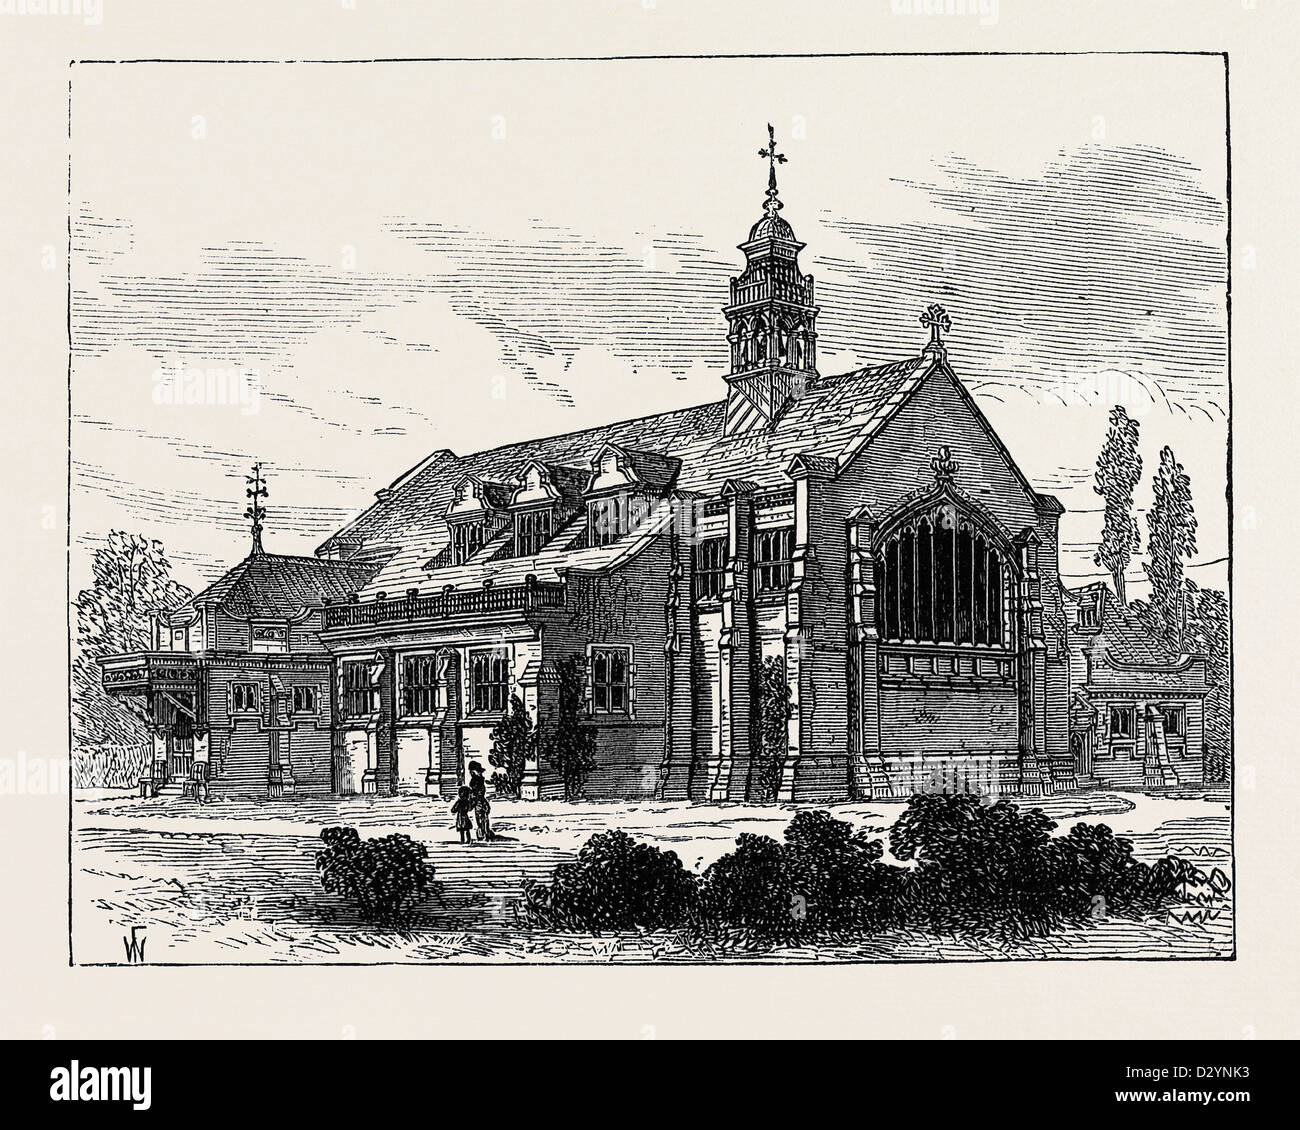 CHURCH OF ST. MICHAEL AND ALL ANGELS BEDFORD PARK CHISWICK LONDON 1880 Stock Photo